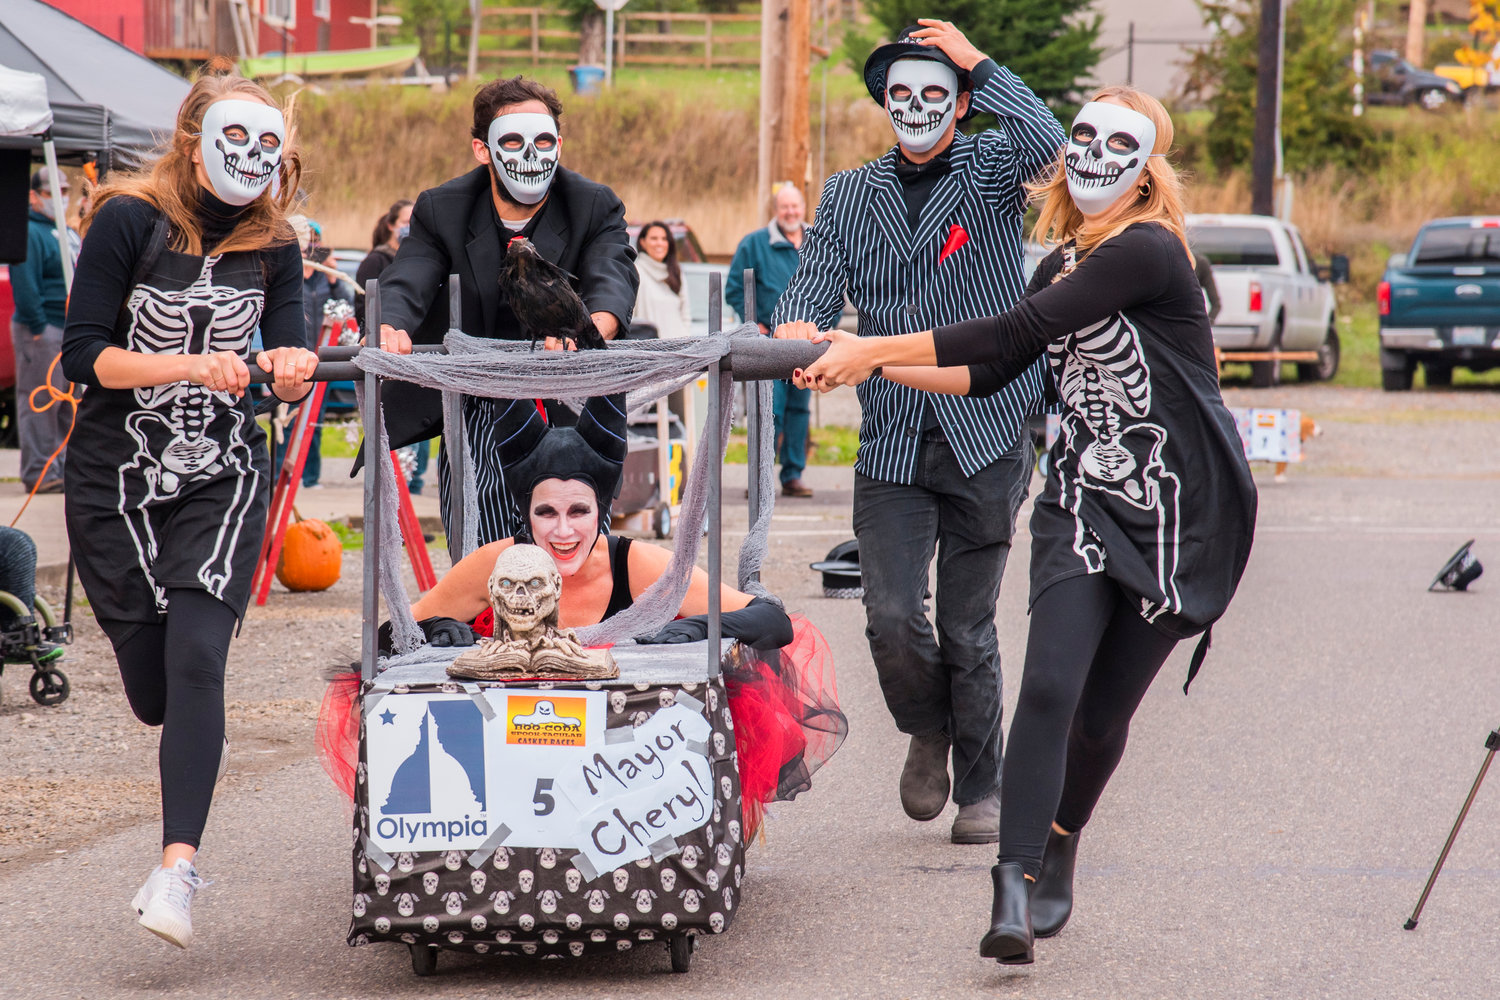 Olympia Mayor Cheryl Selby, laughs while riding in a pine box dressed as Maleficent, along with her City of Olympia crewmates during the Casket Race event outside Boo-coda Town Hall Saturday afternoon.